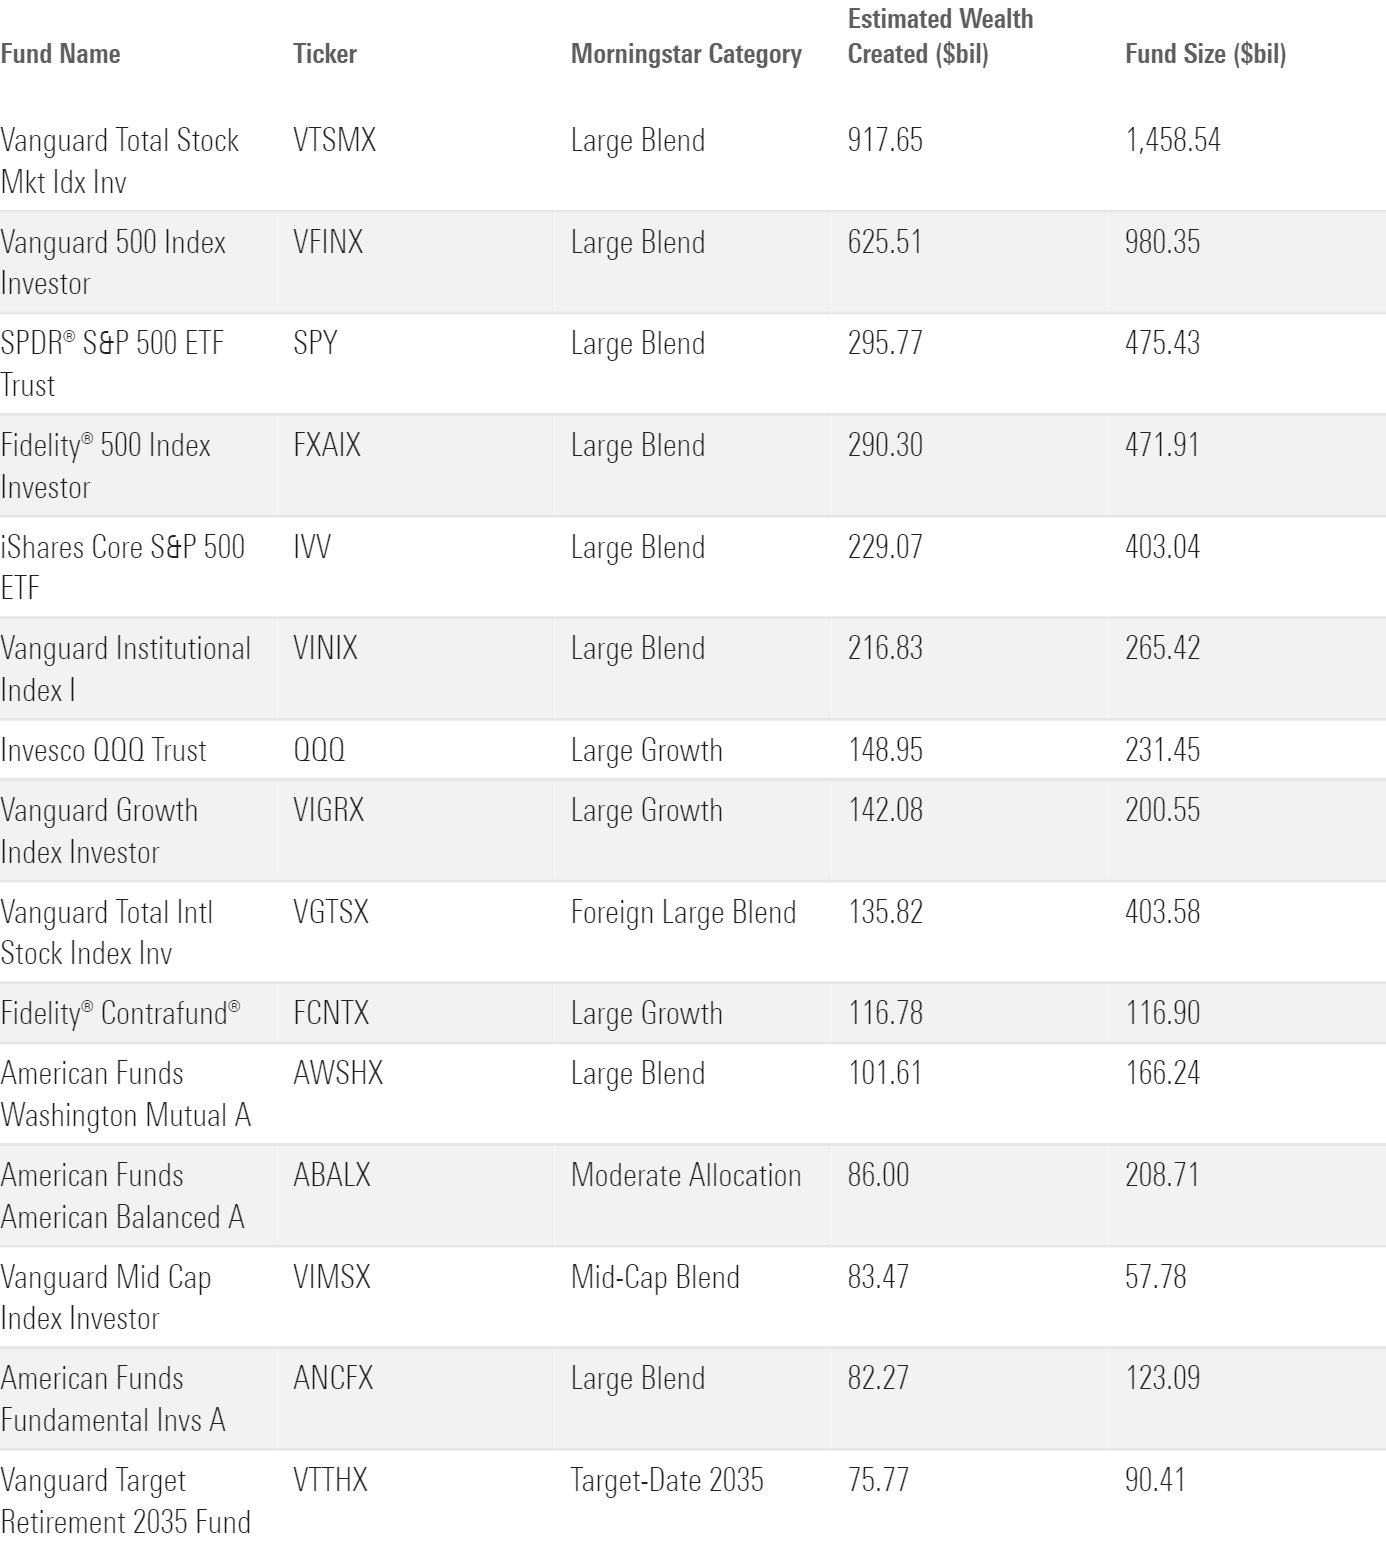 A table showing the top 15 funds based on shareholder value creation over the past 10 years.